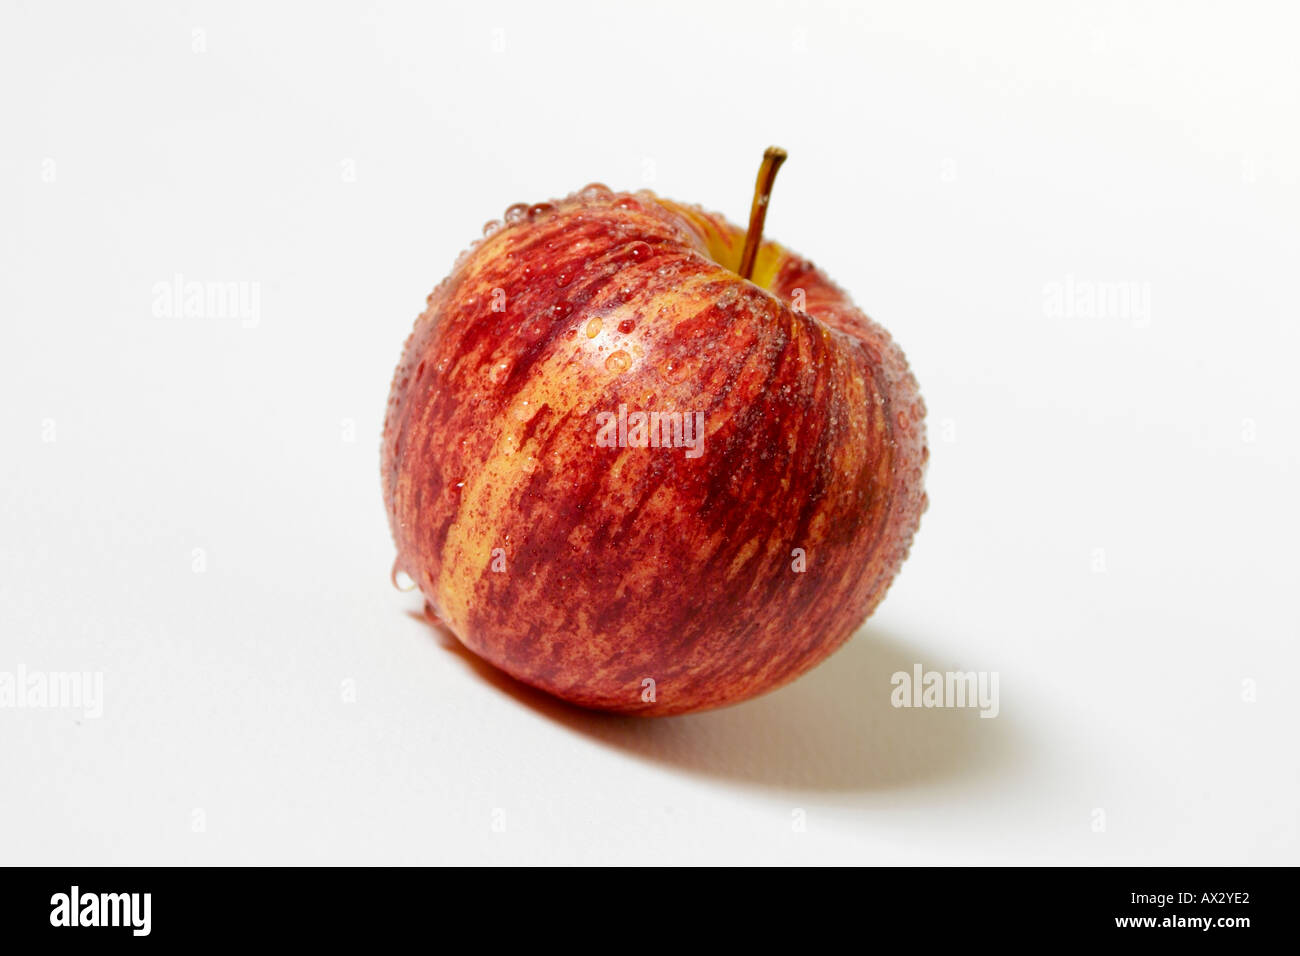 apple health light Fruits cut-out bunch wellfood a Stock Photo